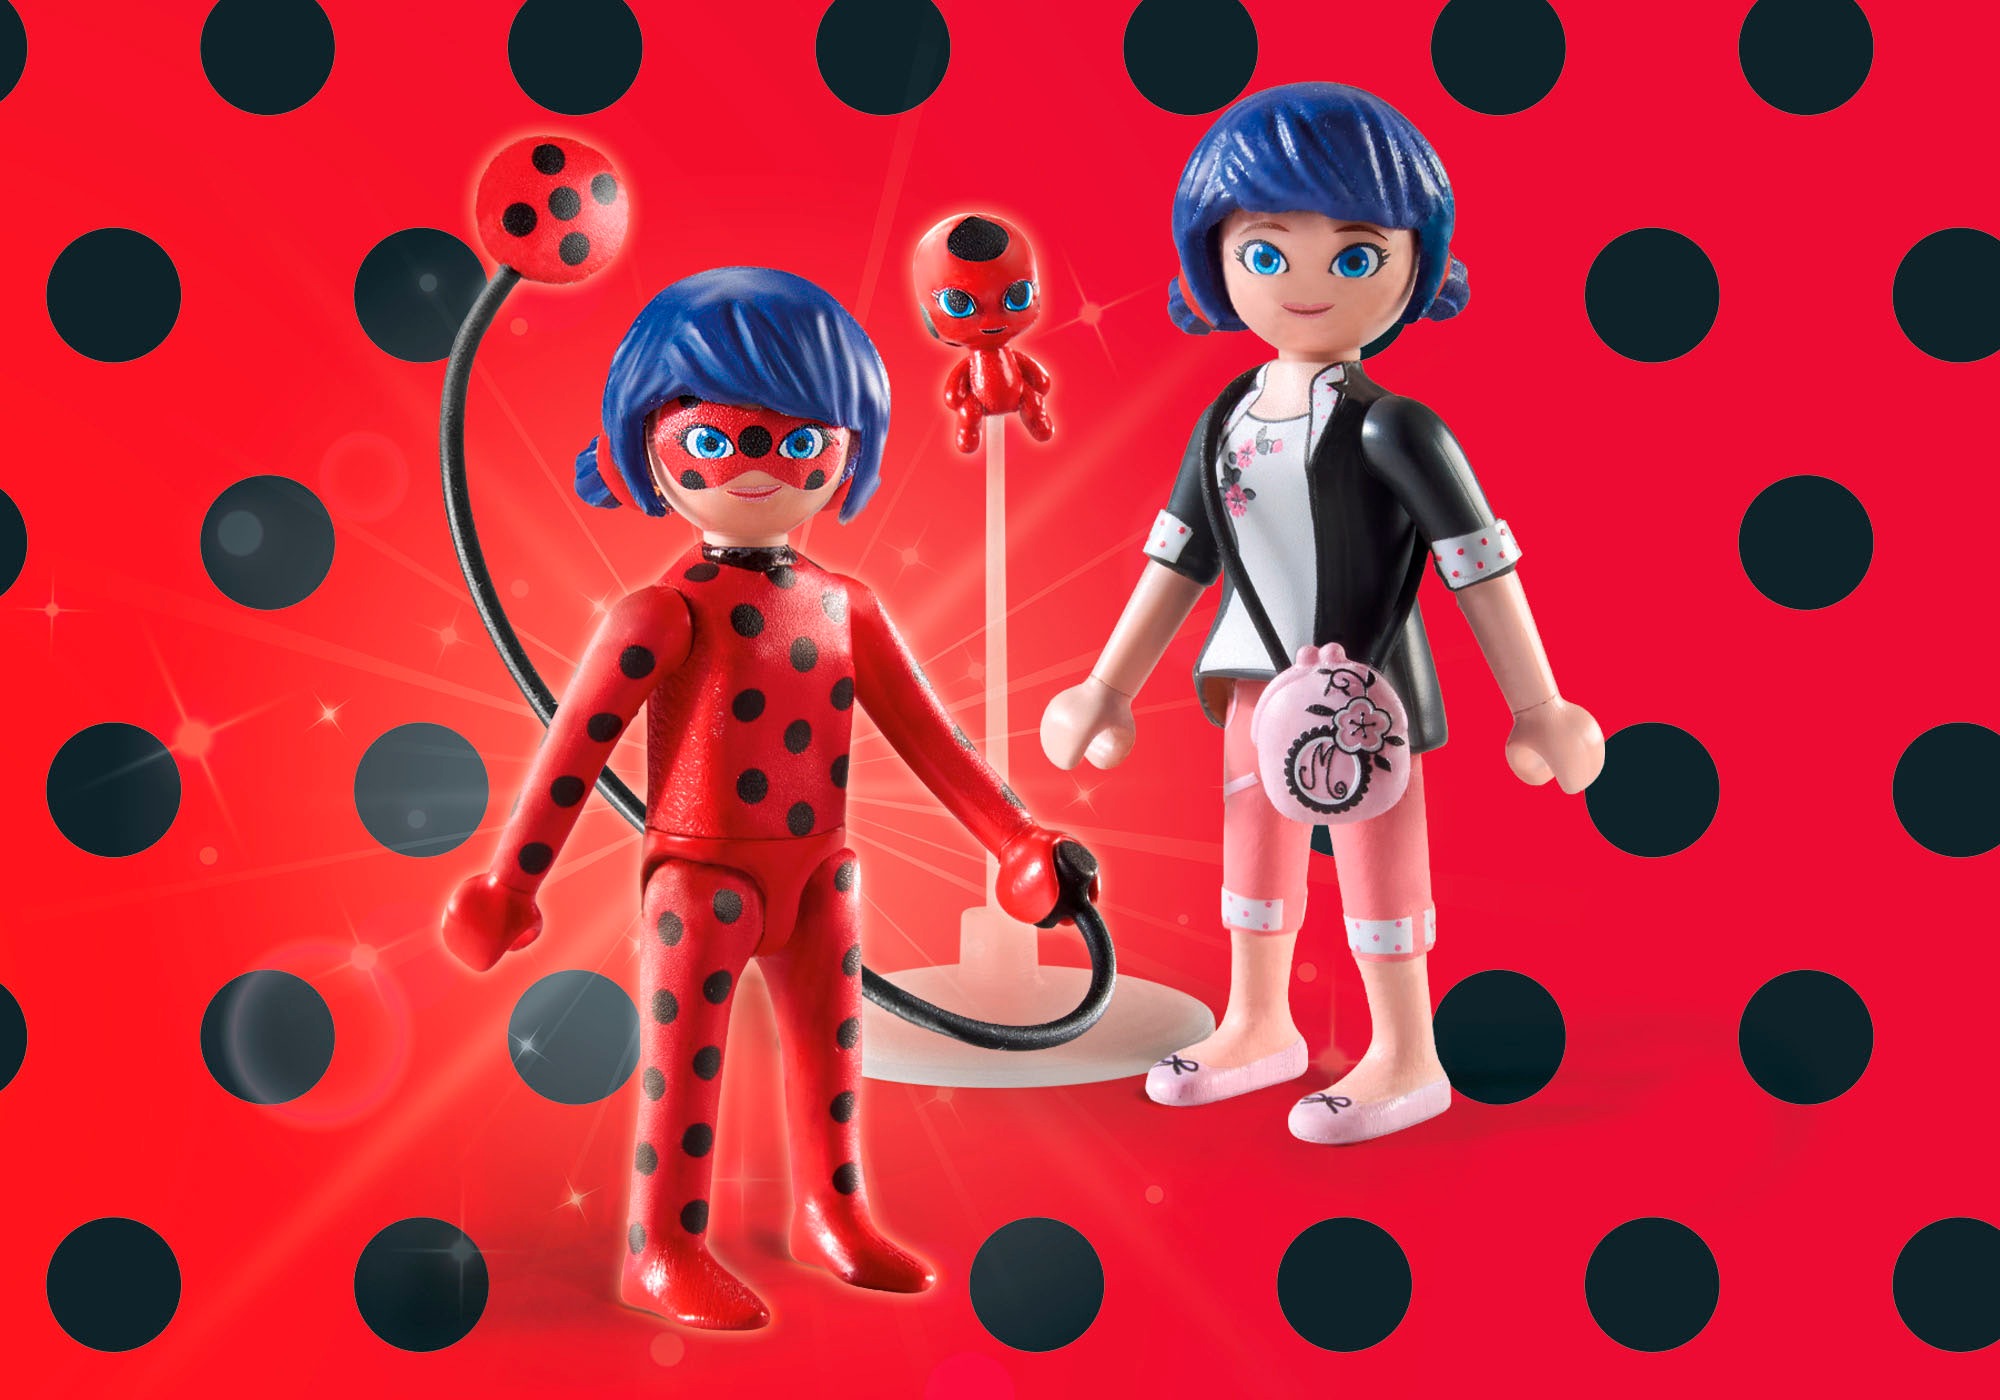 Playmobil® Konstruktions-Spielset »Miraculous: Marinette & Ladybug (71336), Miraculous«, (16 St.), Made in Europe